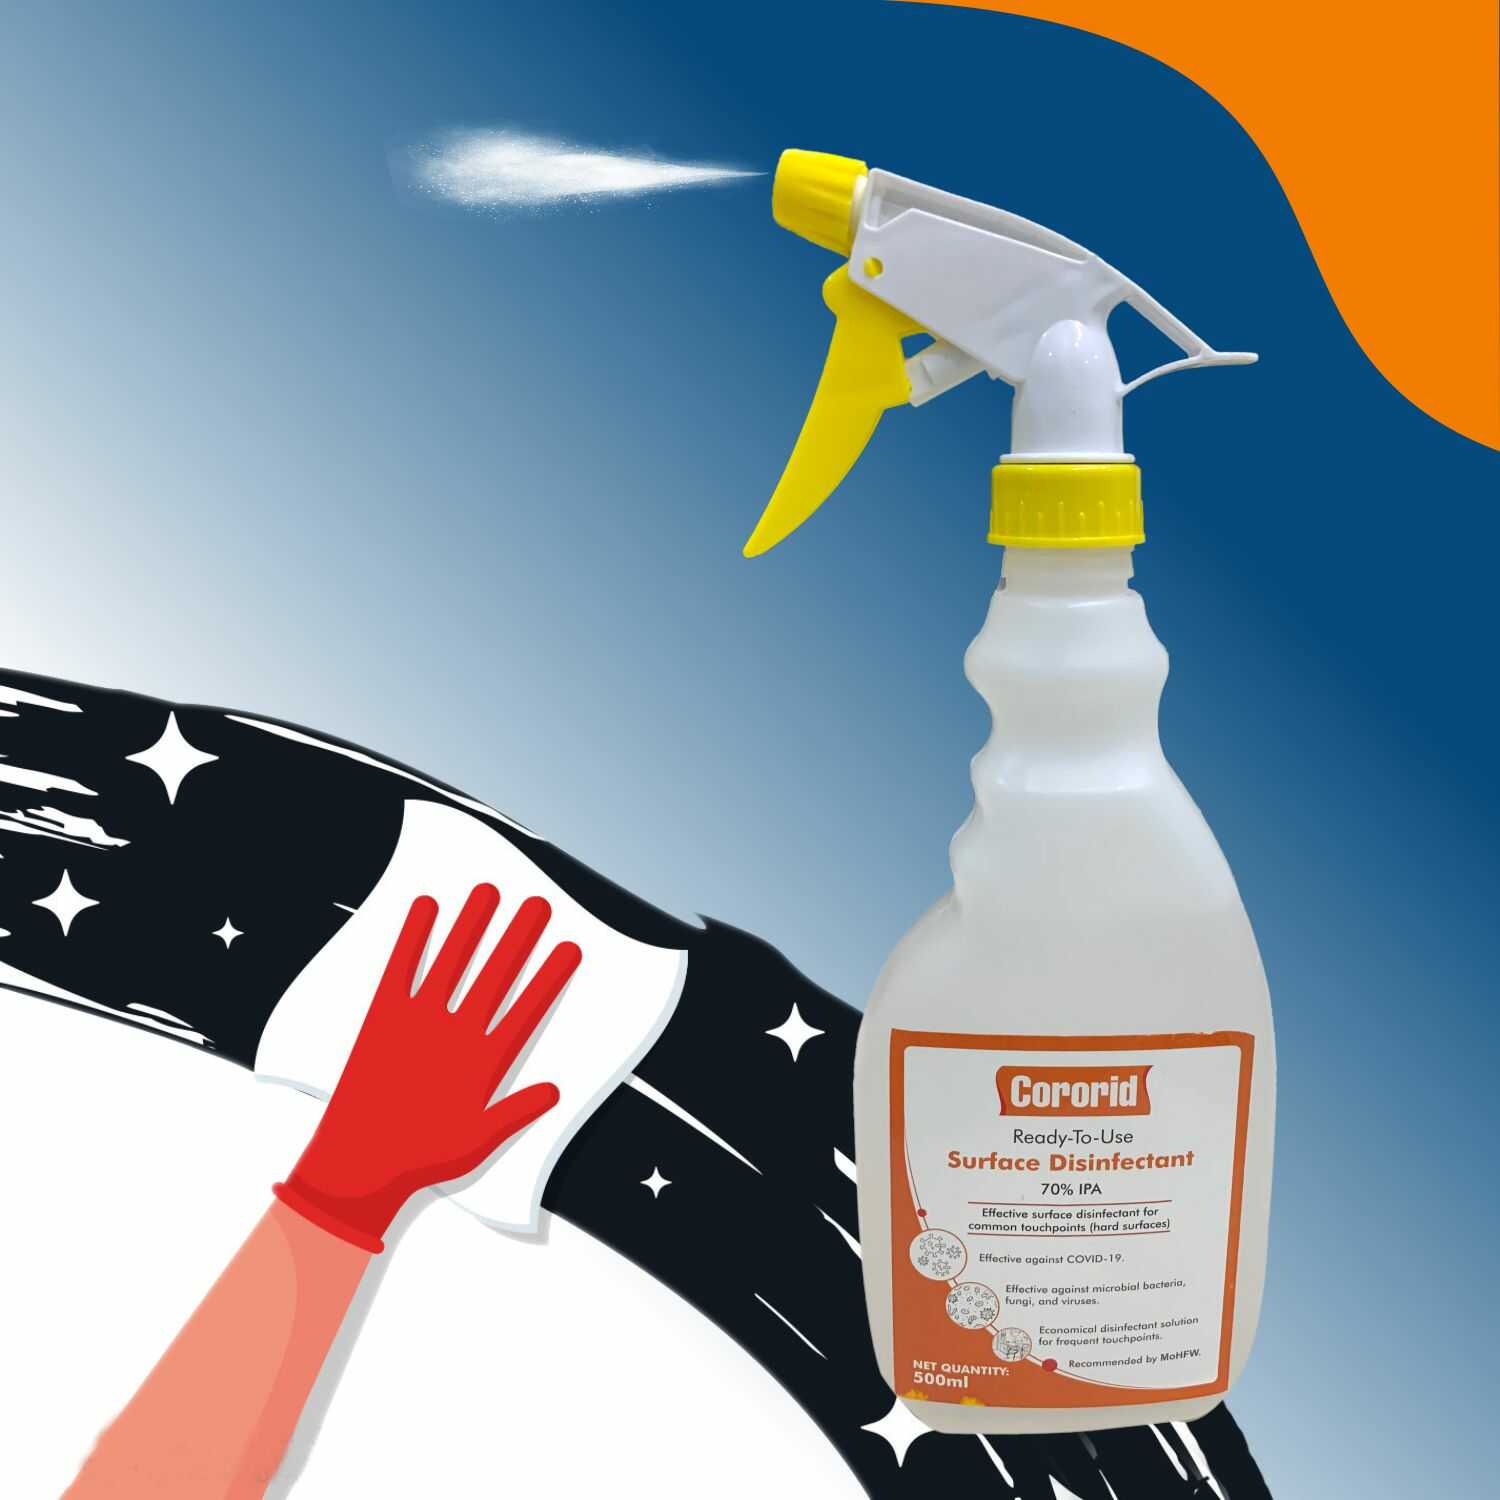 Ready-to-use Surface Disinfectant (70% IPA)